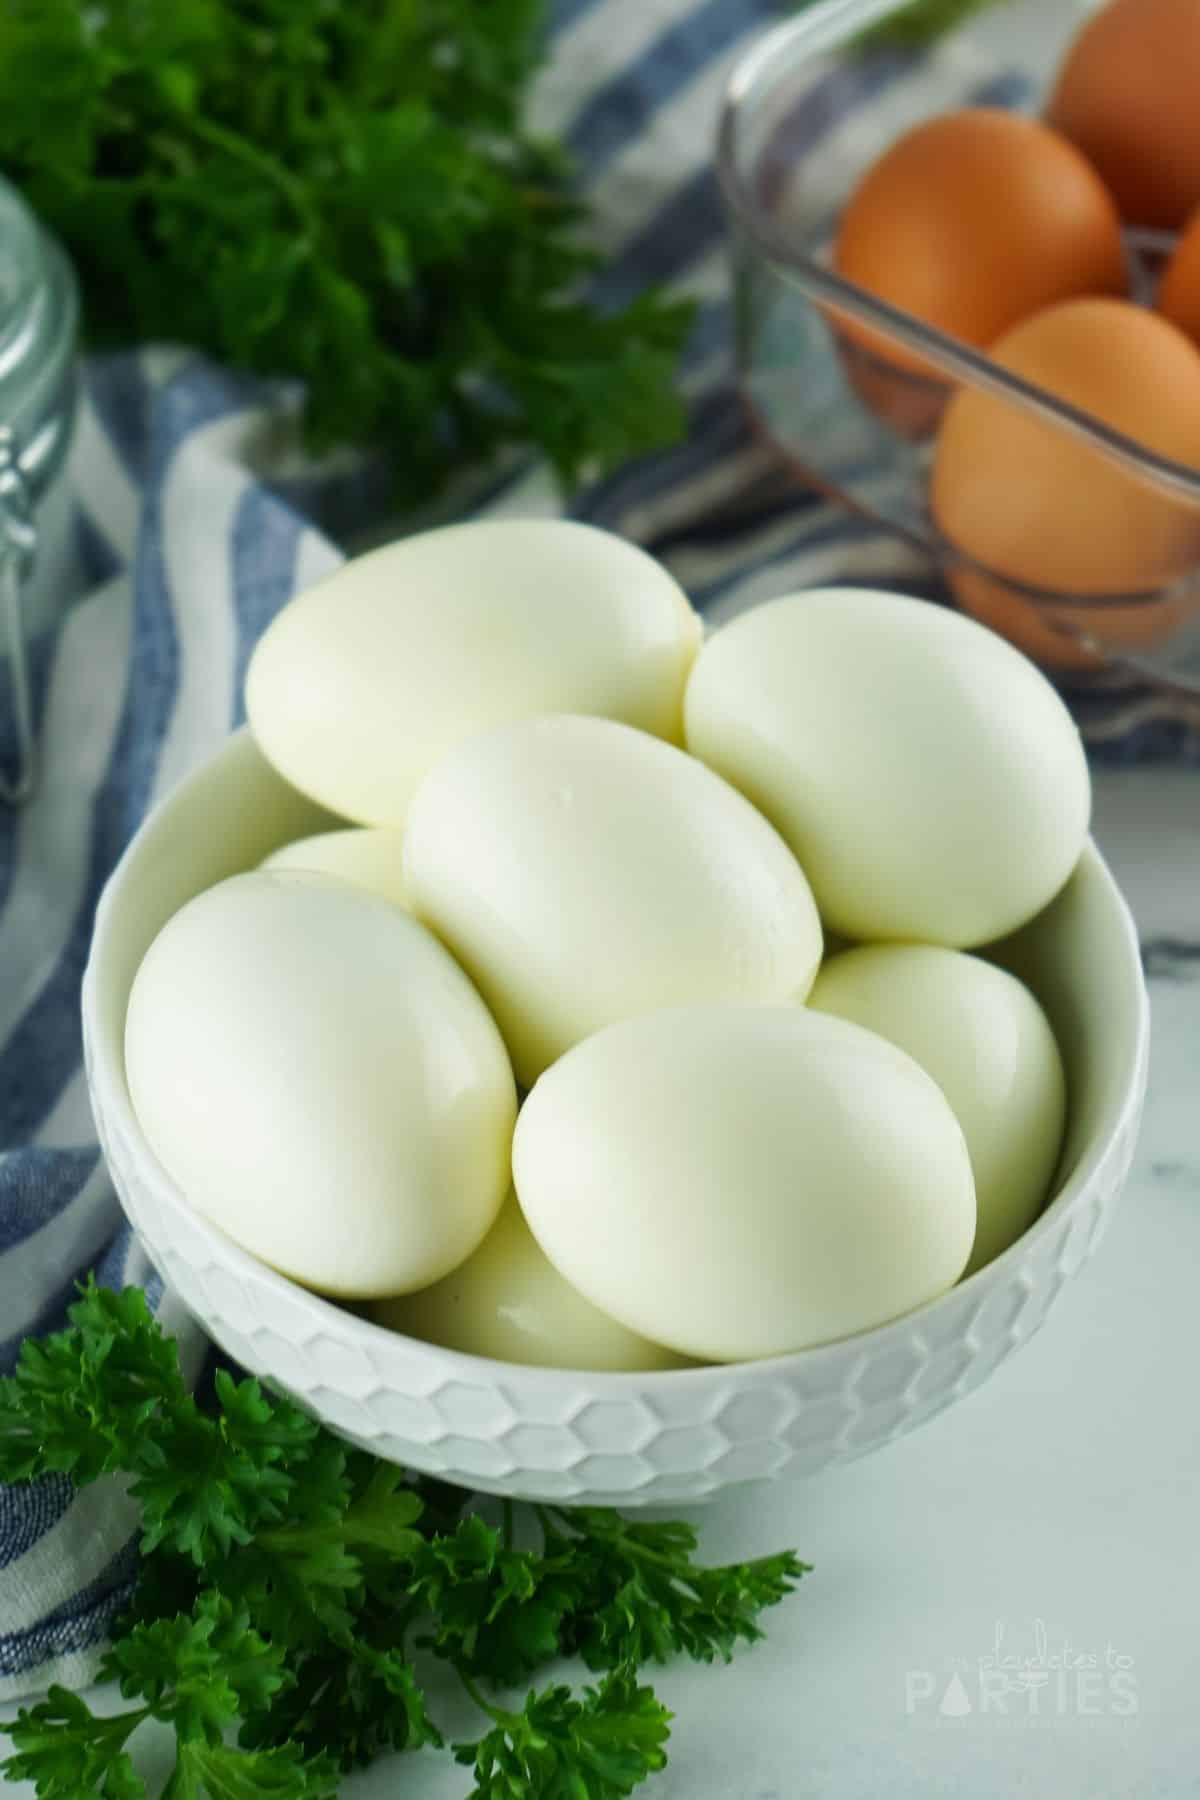 Peeled eggs in a bowl with no blemishes.